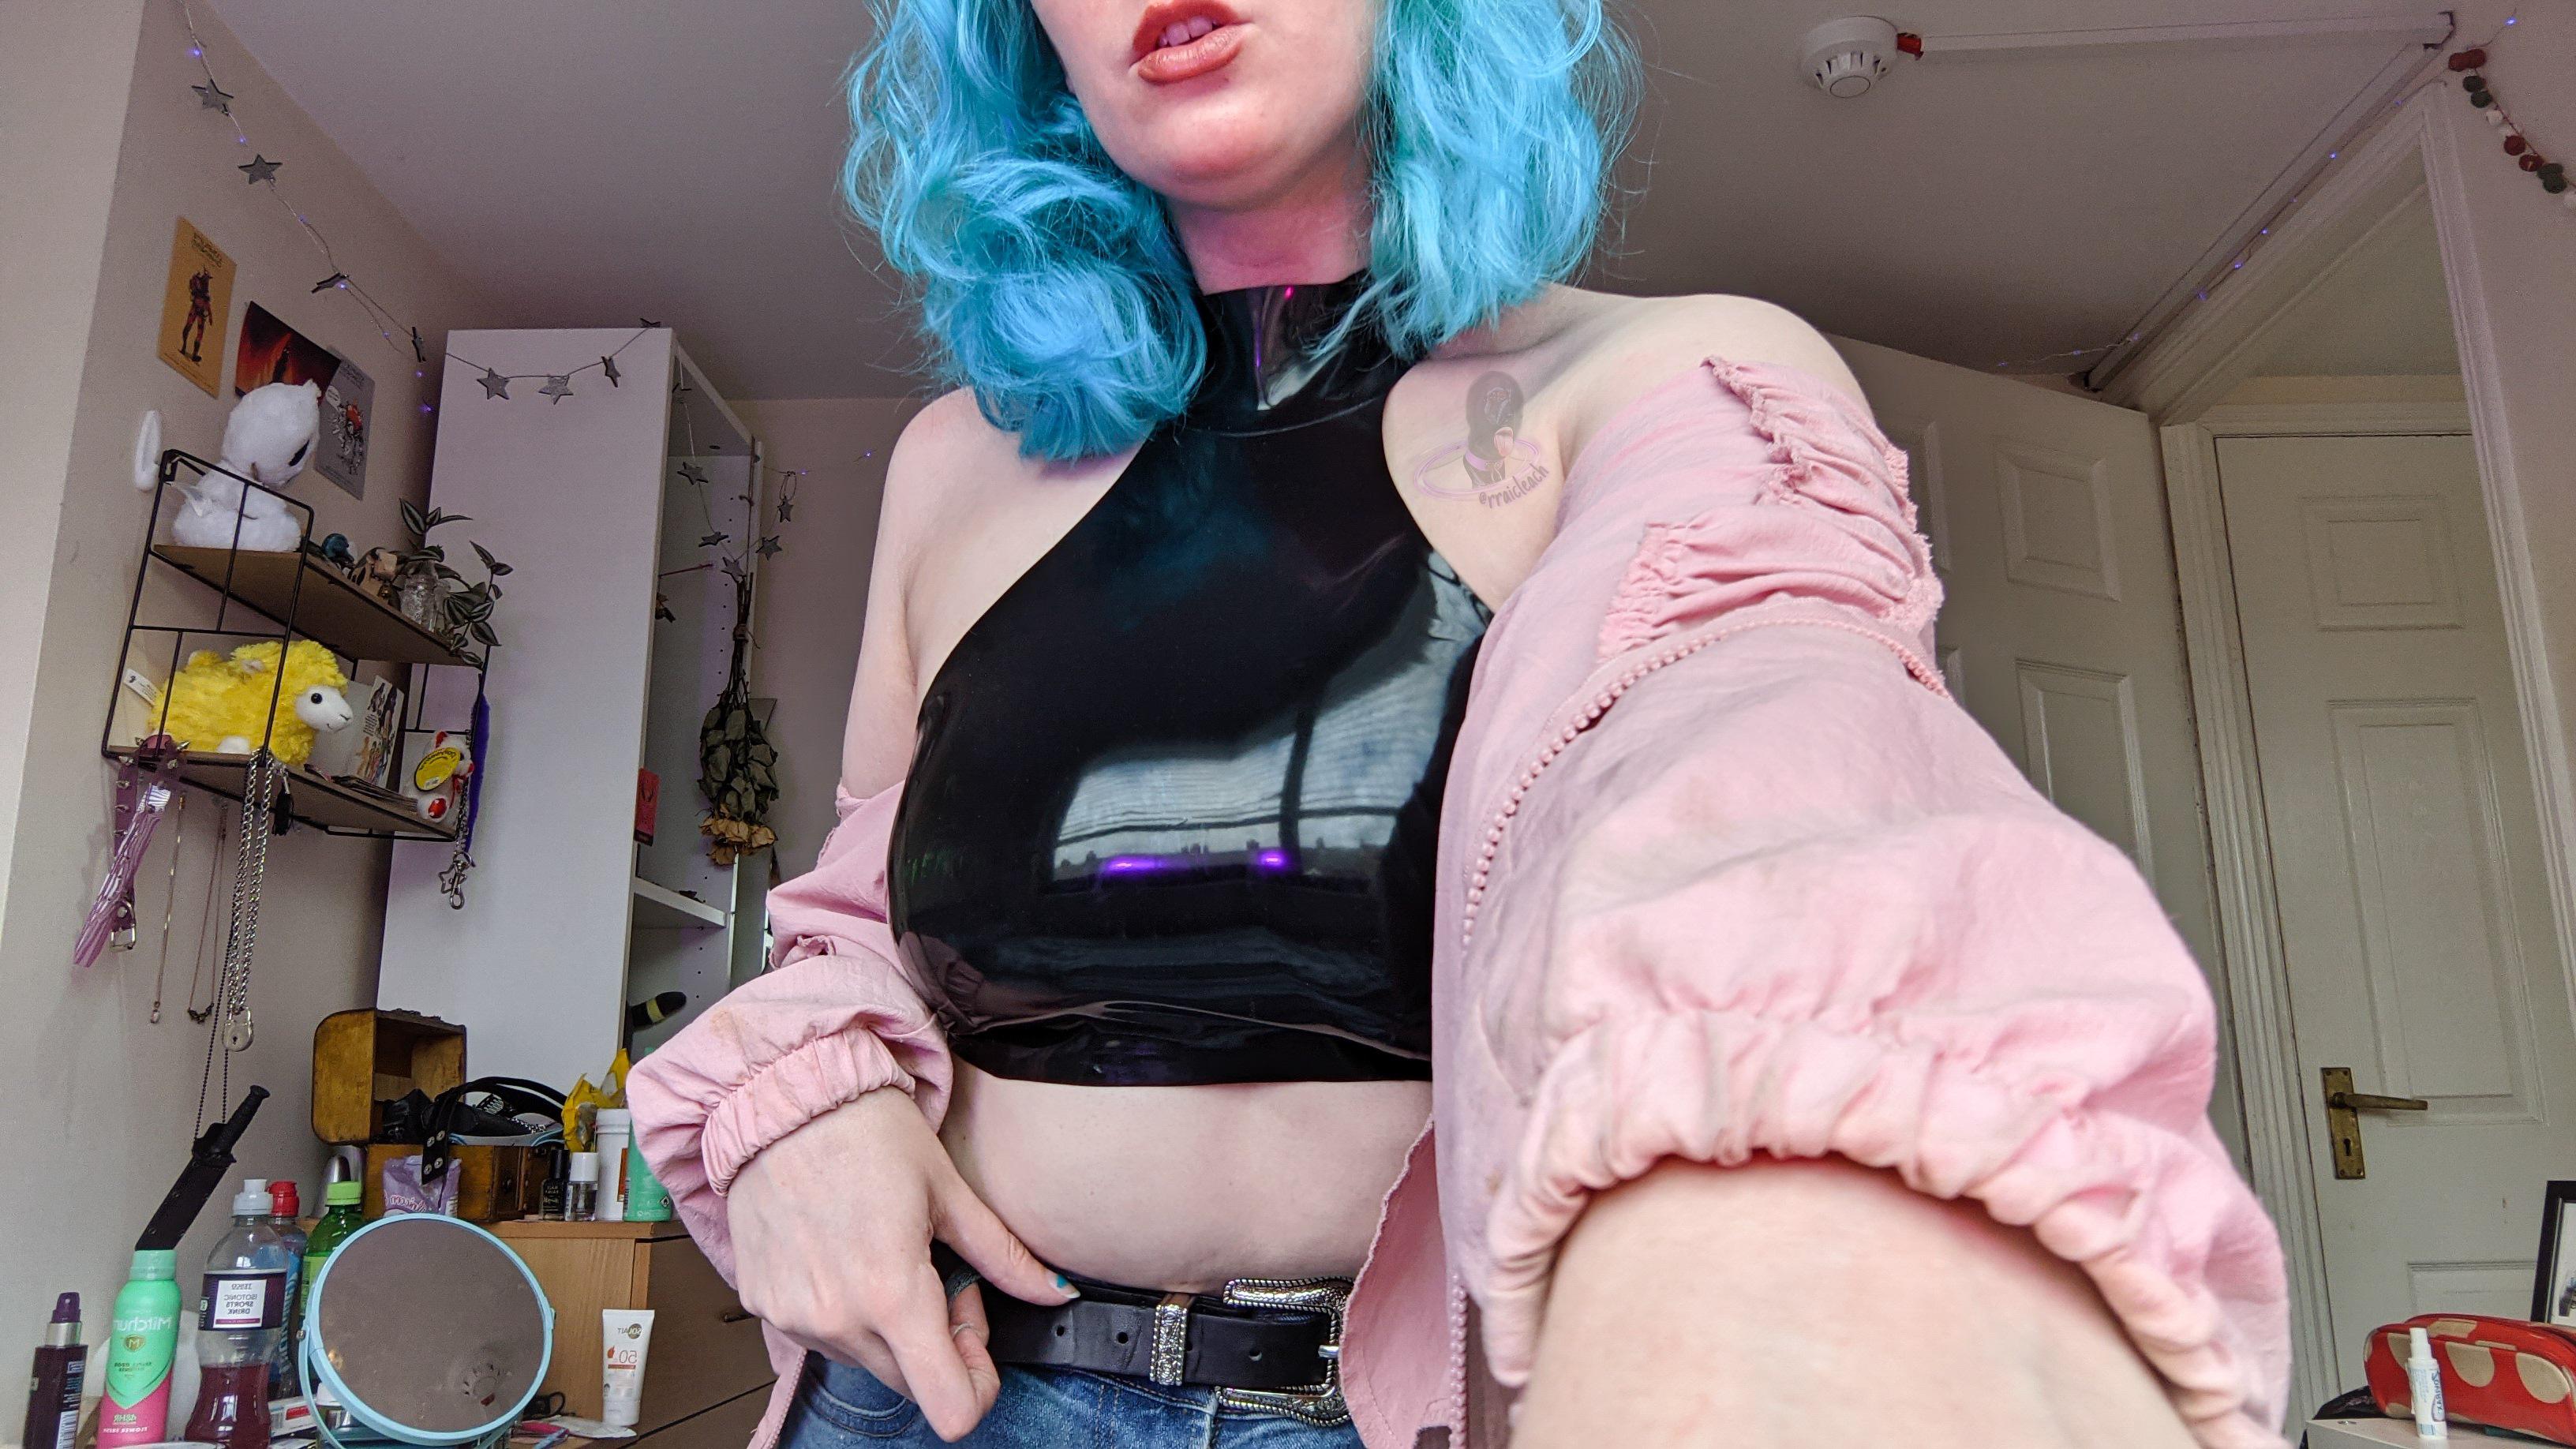 How Do We Feel About Latex With Casual Clothes?